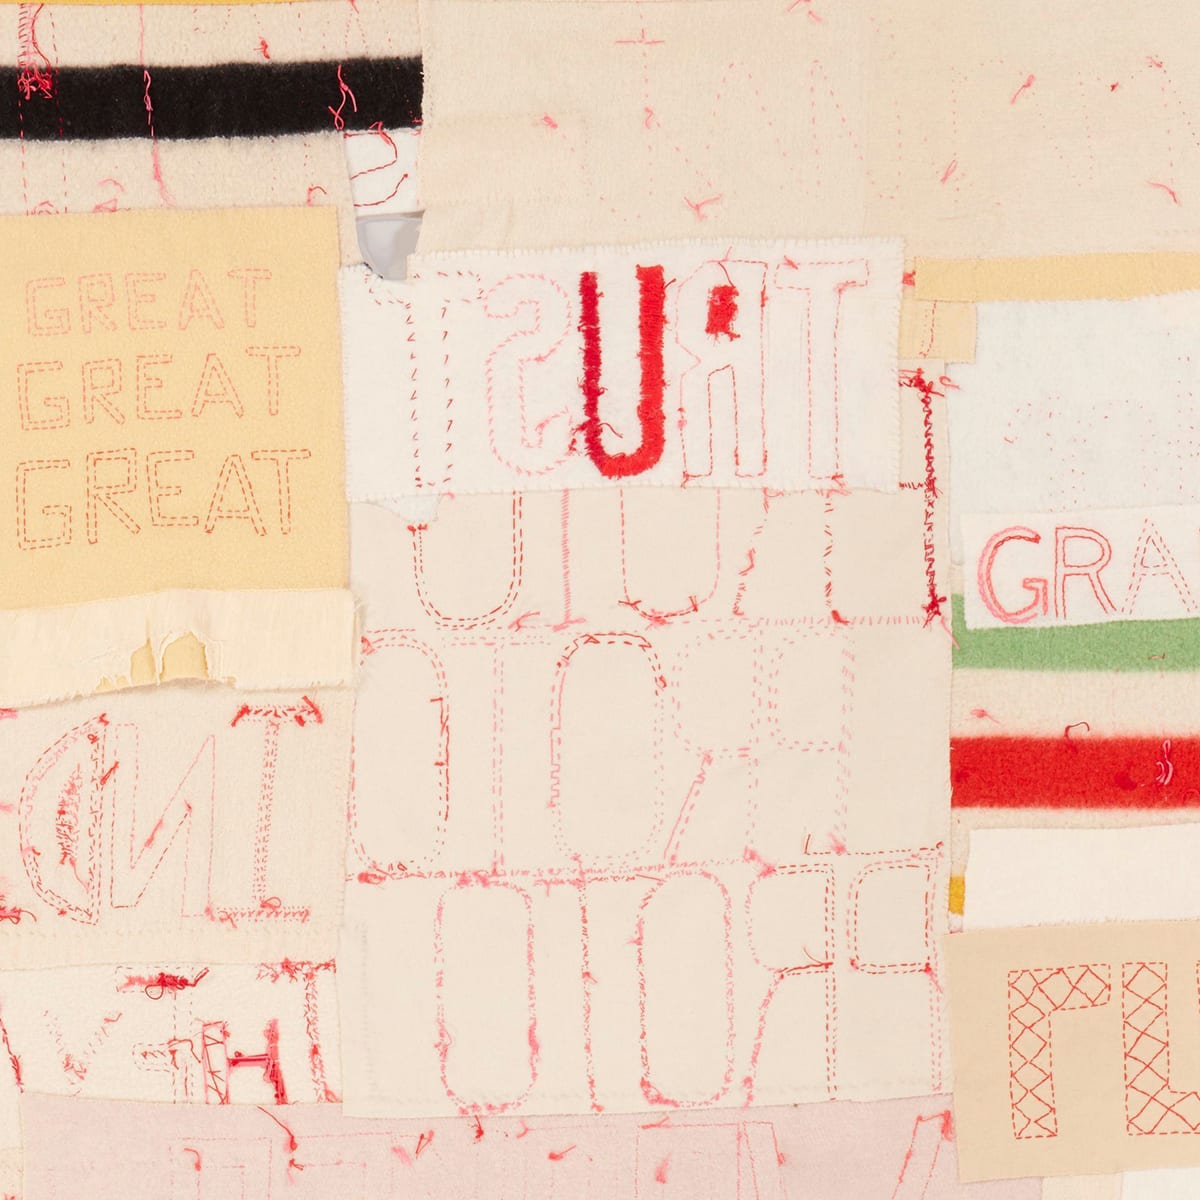 Detail of the back of the work showing words in reverse, knots, and loose threads. In contrast to the reversed lettering, at upper left the words Great, Great, Great are stacked one on top of the other increasing in size. A black and cream striped blanket fragment is at top left and a green, cream, and red blanket portion appears at right near the bottom of the detail.